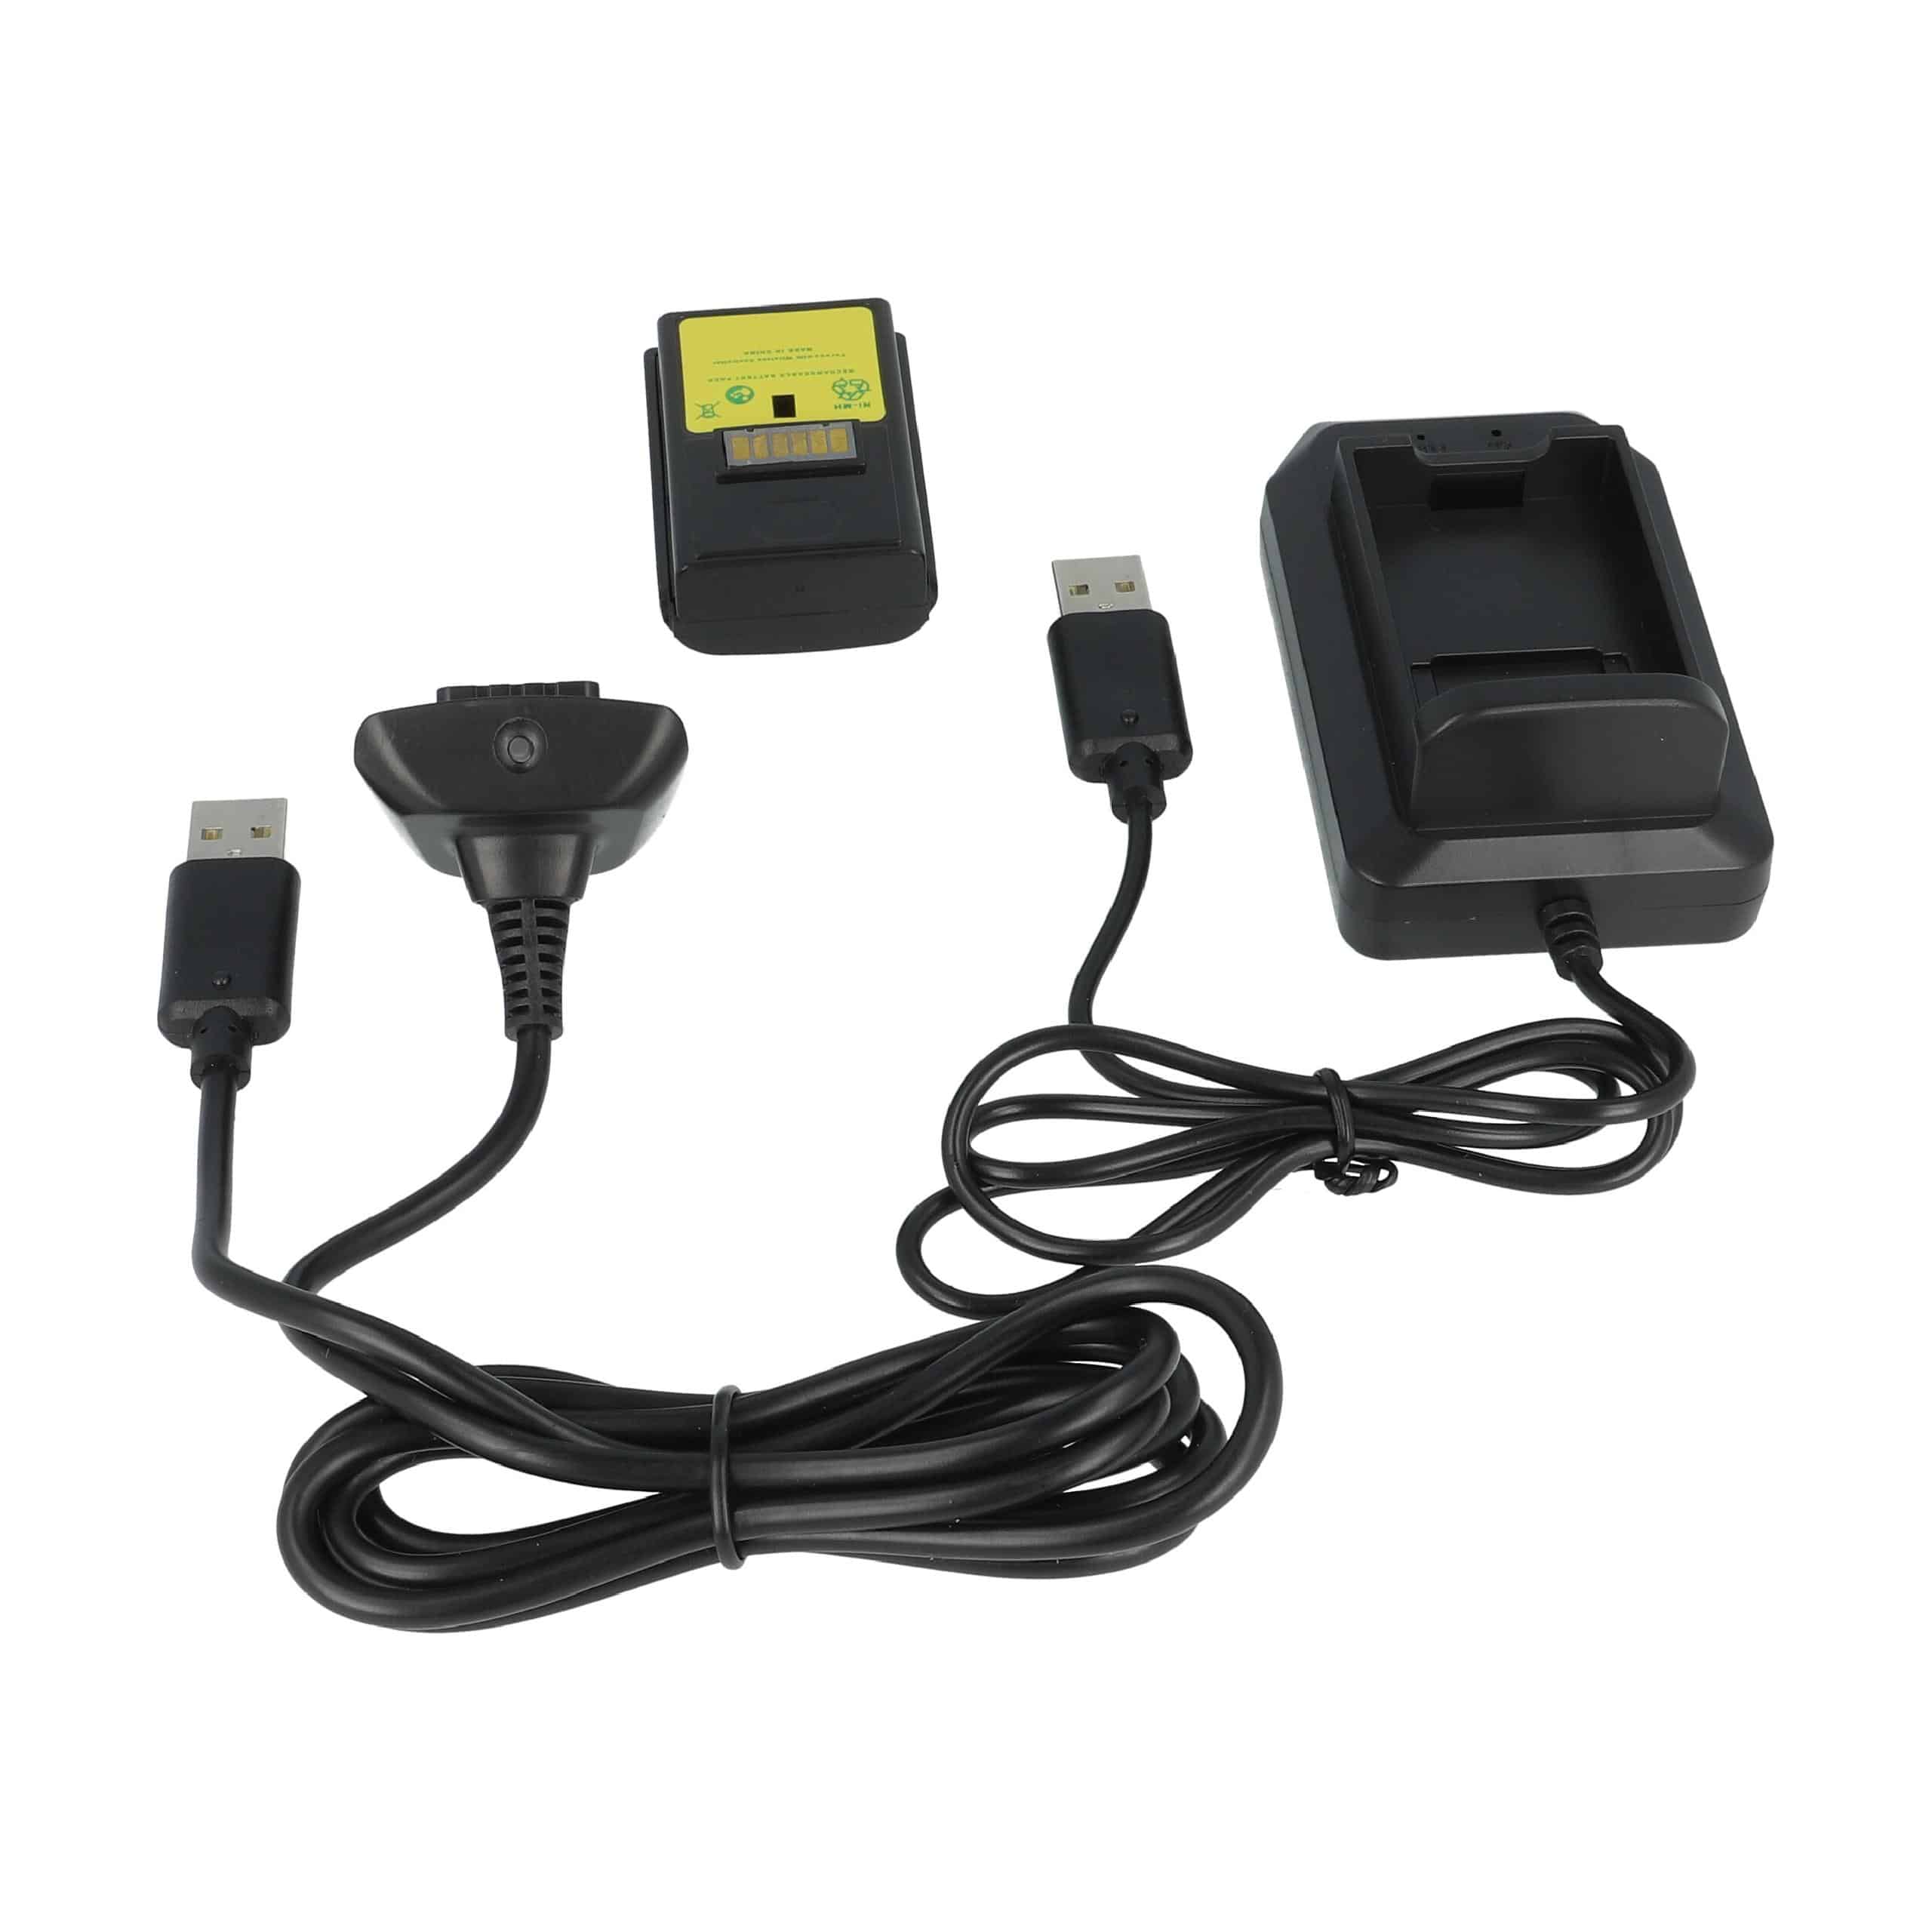 vhbw Play & Charge Kit - 1x charger, 1x charging cable, 1x battery Black